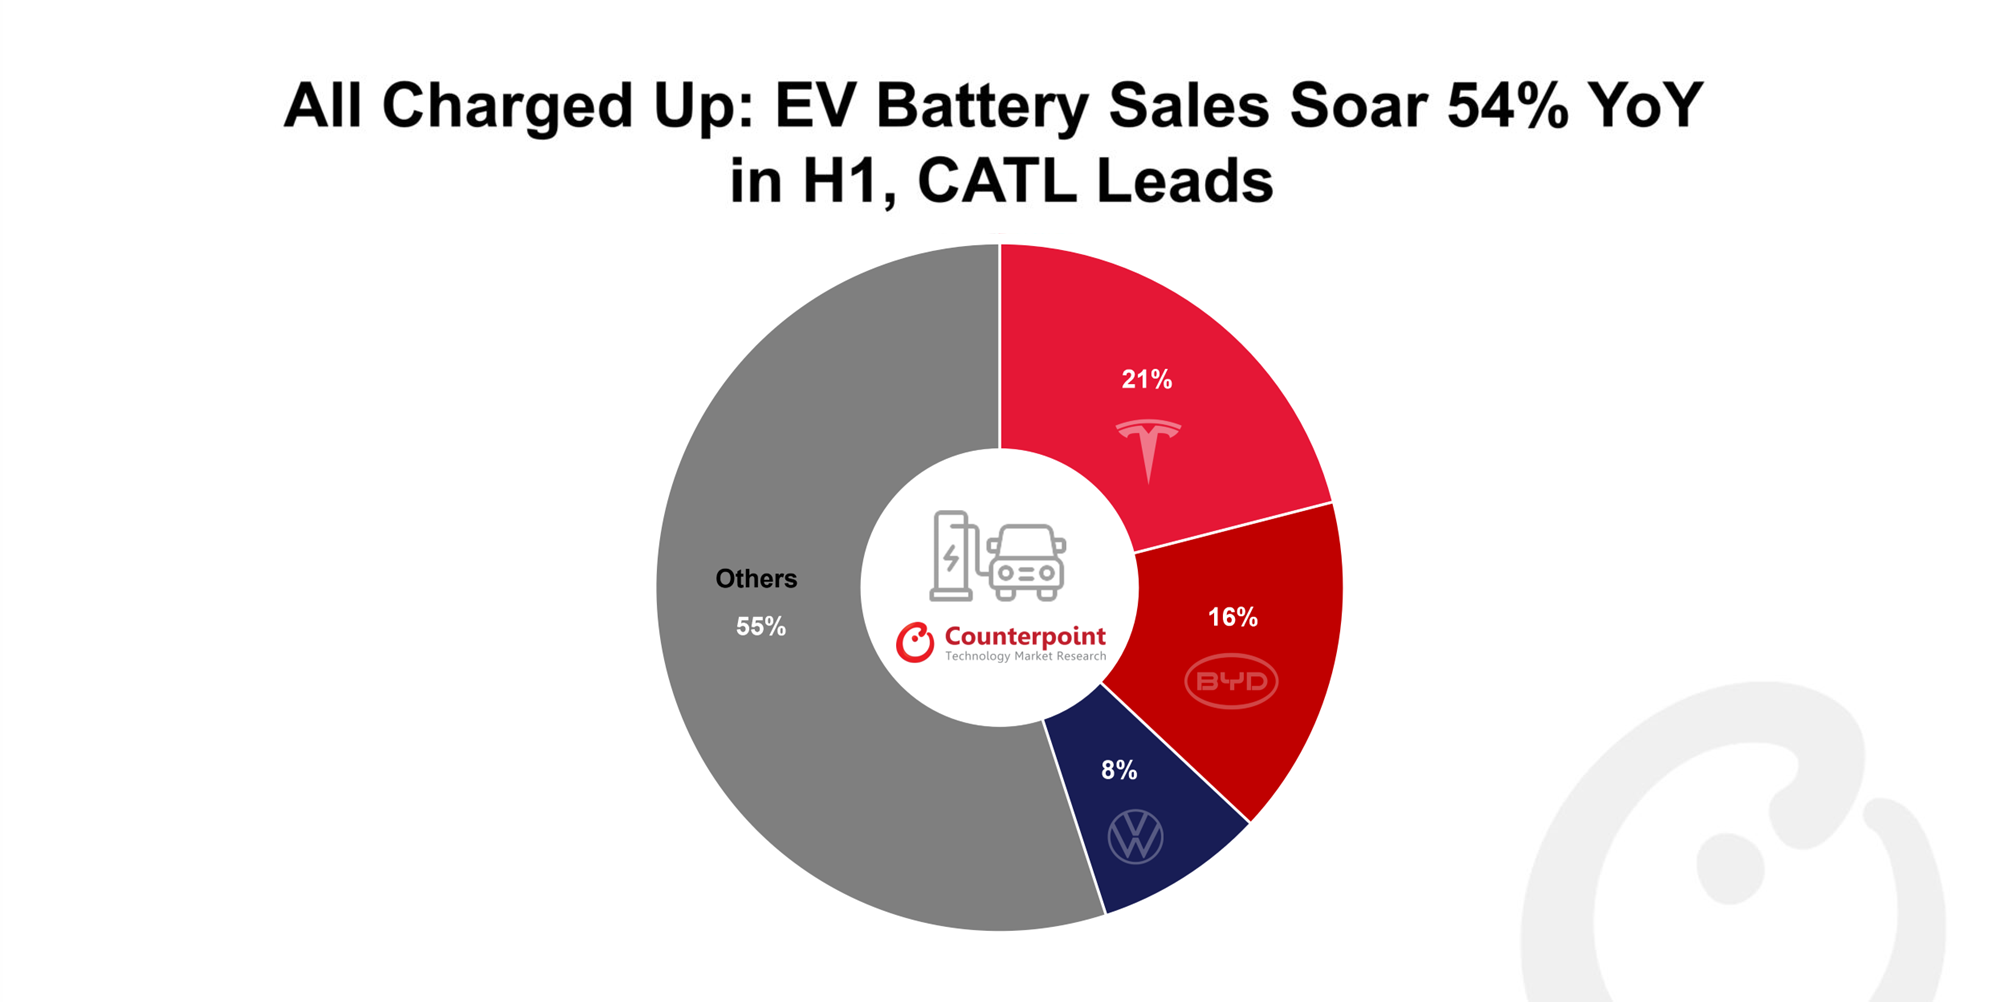 All Charged Up: EV Battery Sales Soar 54% YoY in H1, CATL Leads